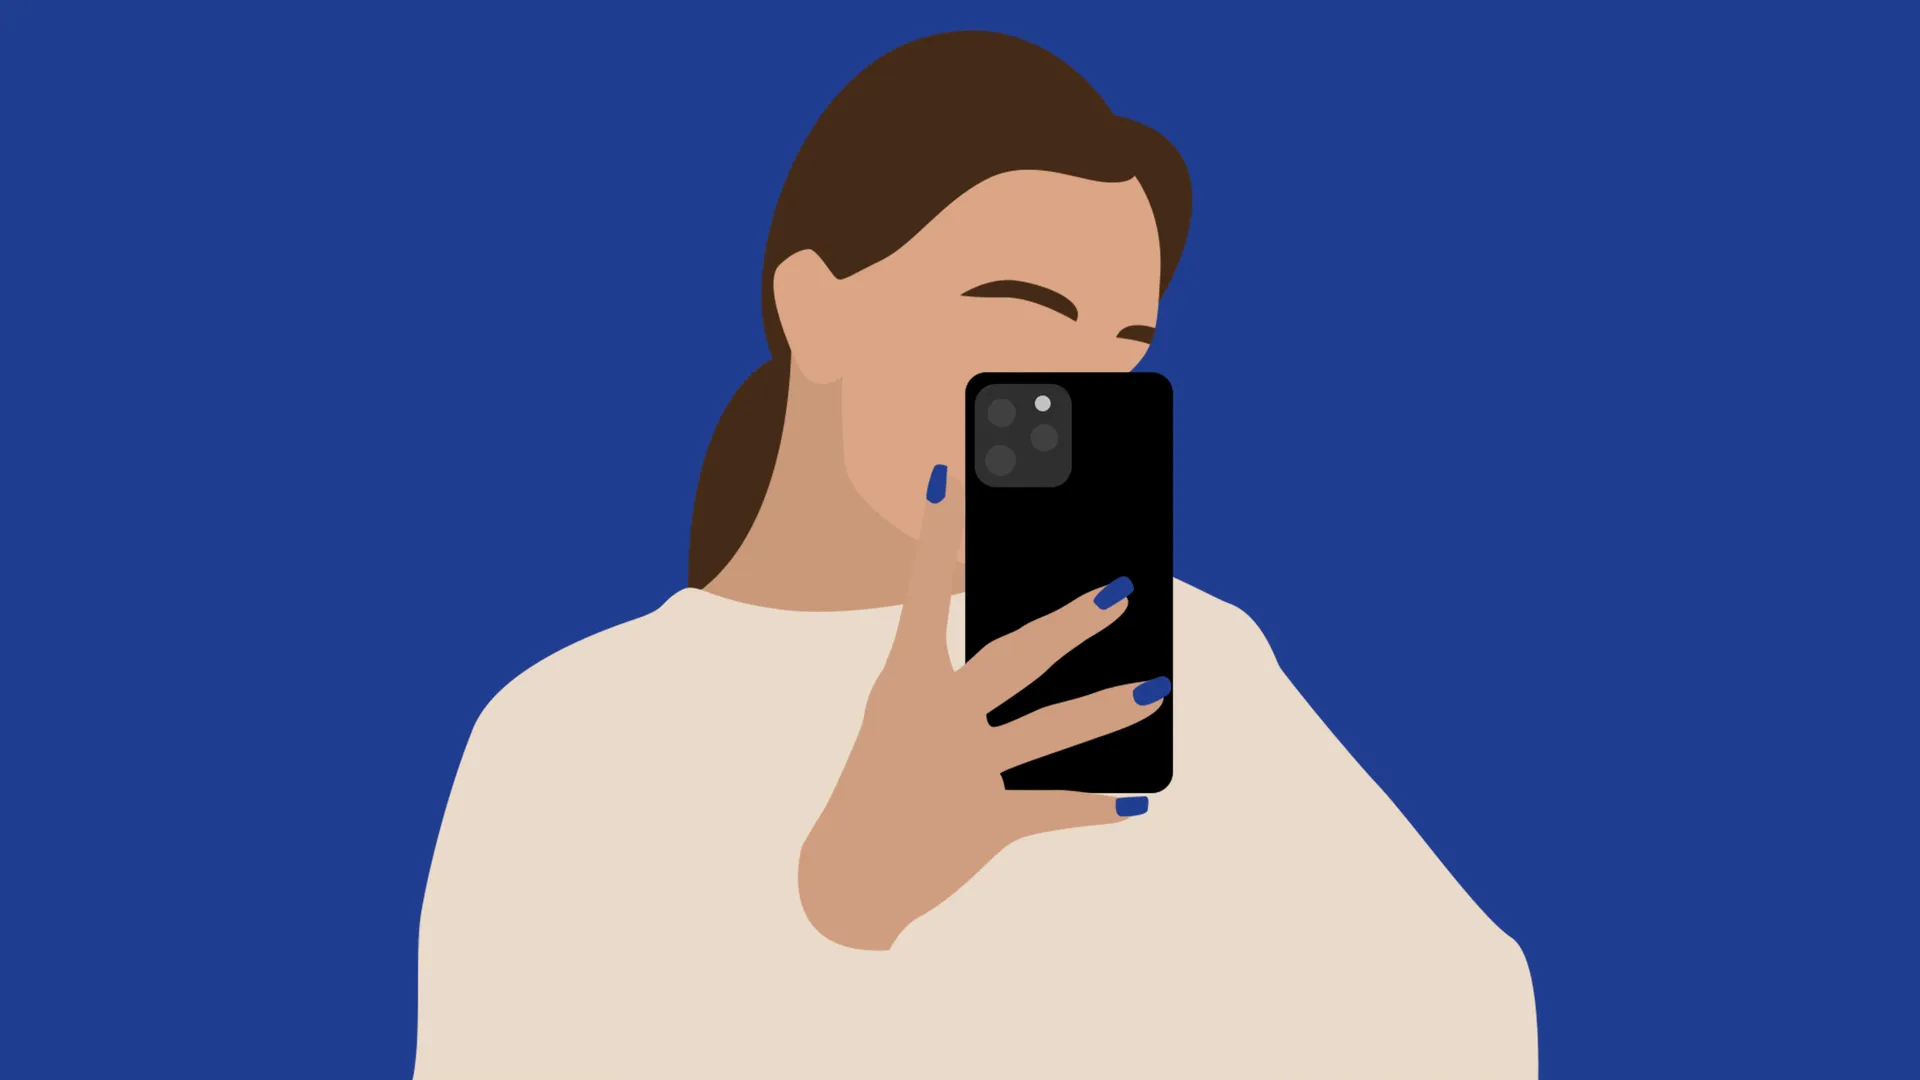 How to Spot a Narcissist on Instagram? by Som Dutt https://embraceinnerchaos.com